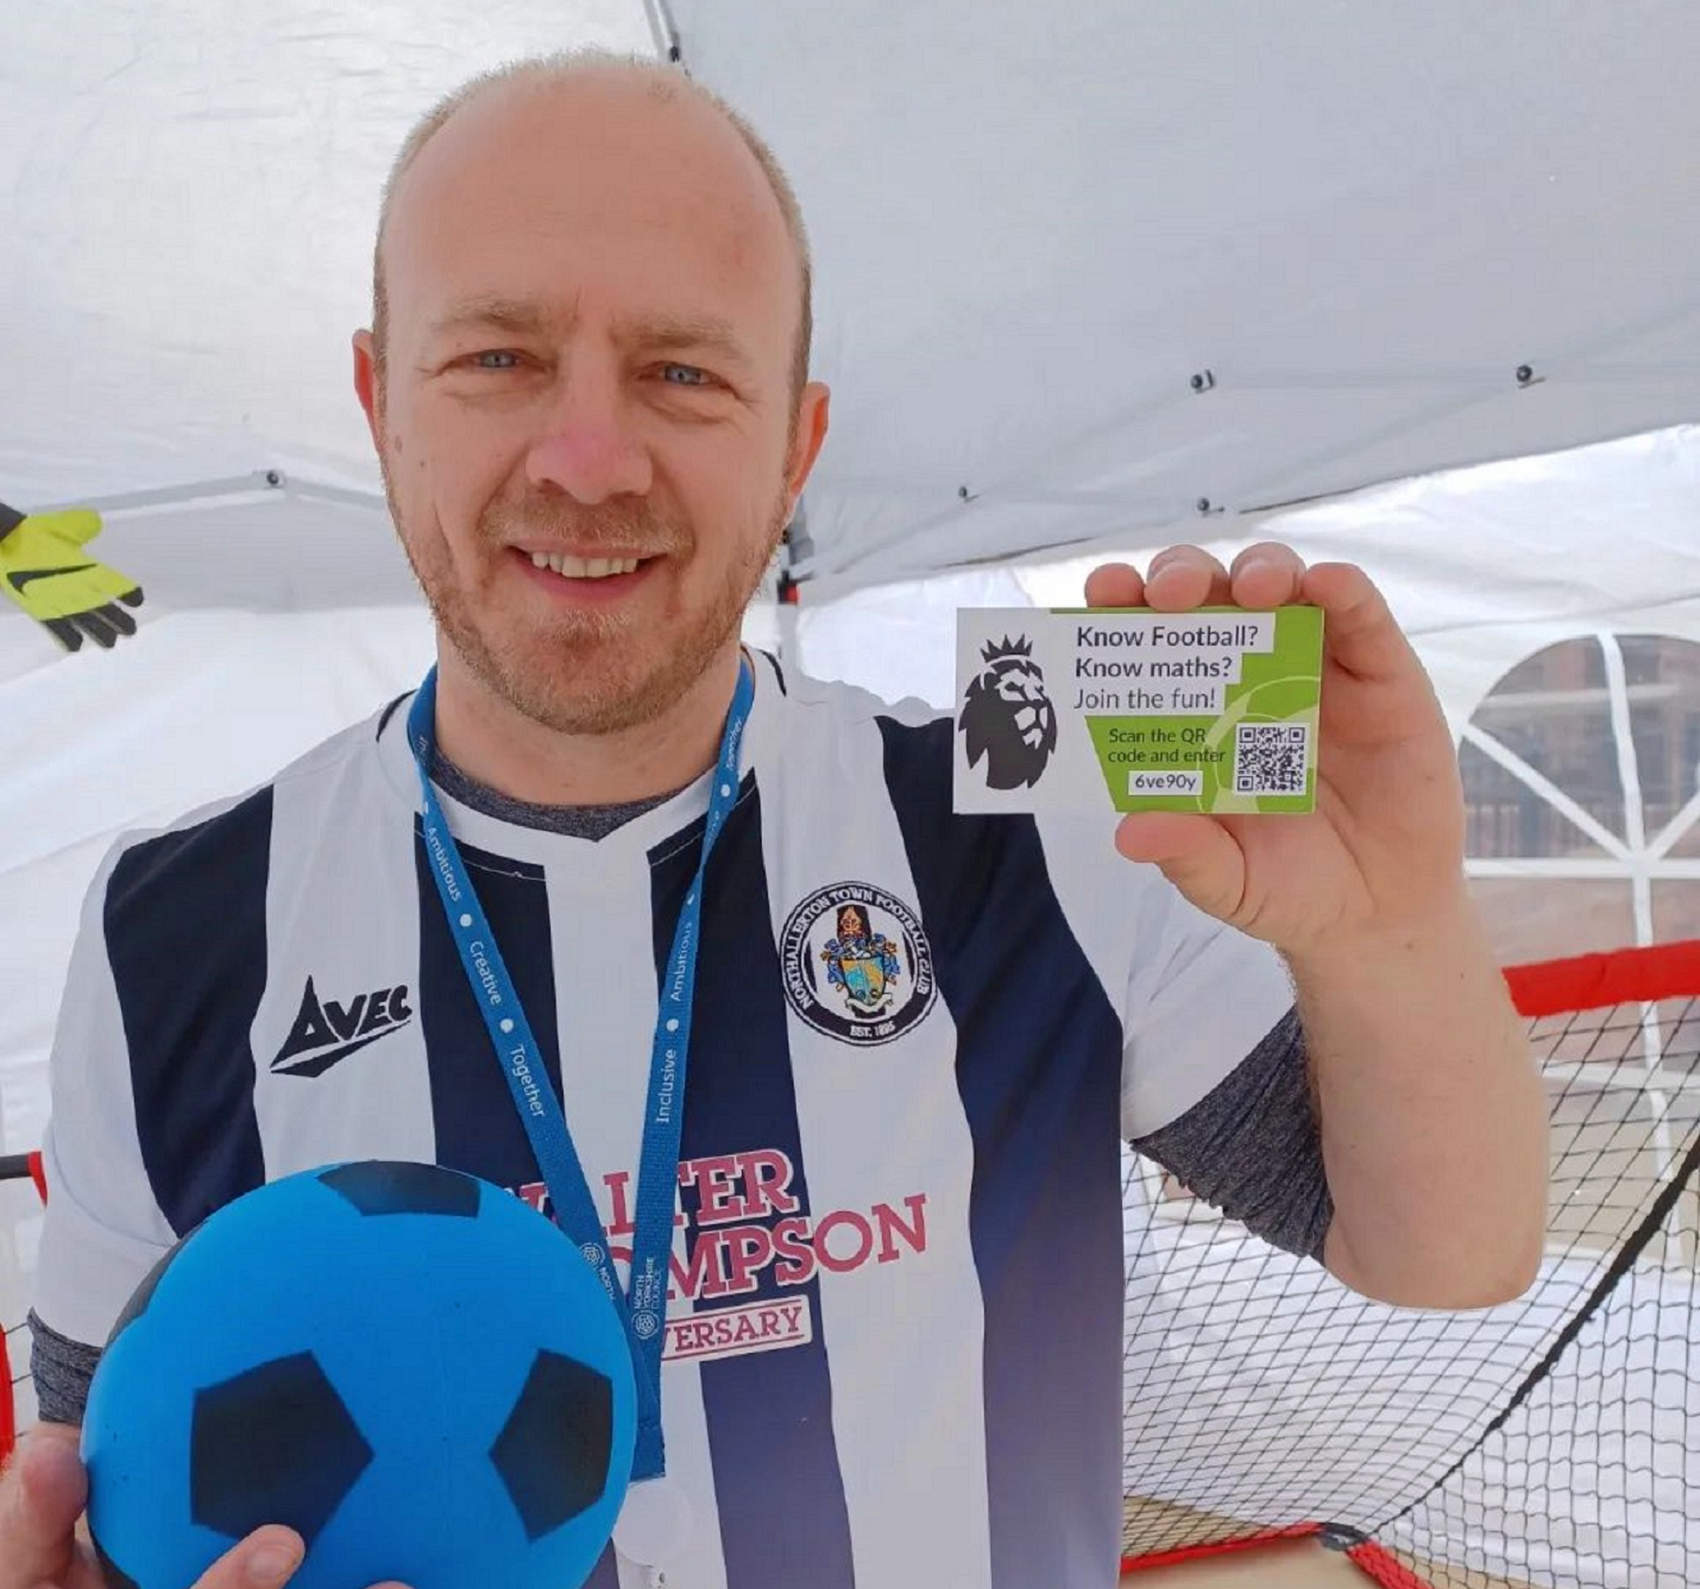 North Yorkshire Council’s partnership development officer, Matt Read, who is encouraging people to improve their numeracy skills by having some football fun